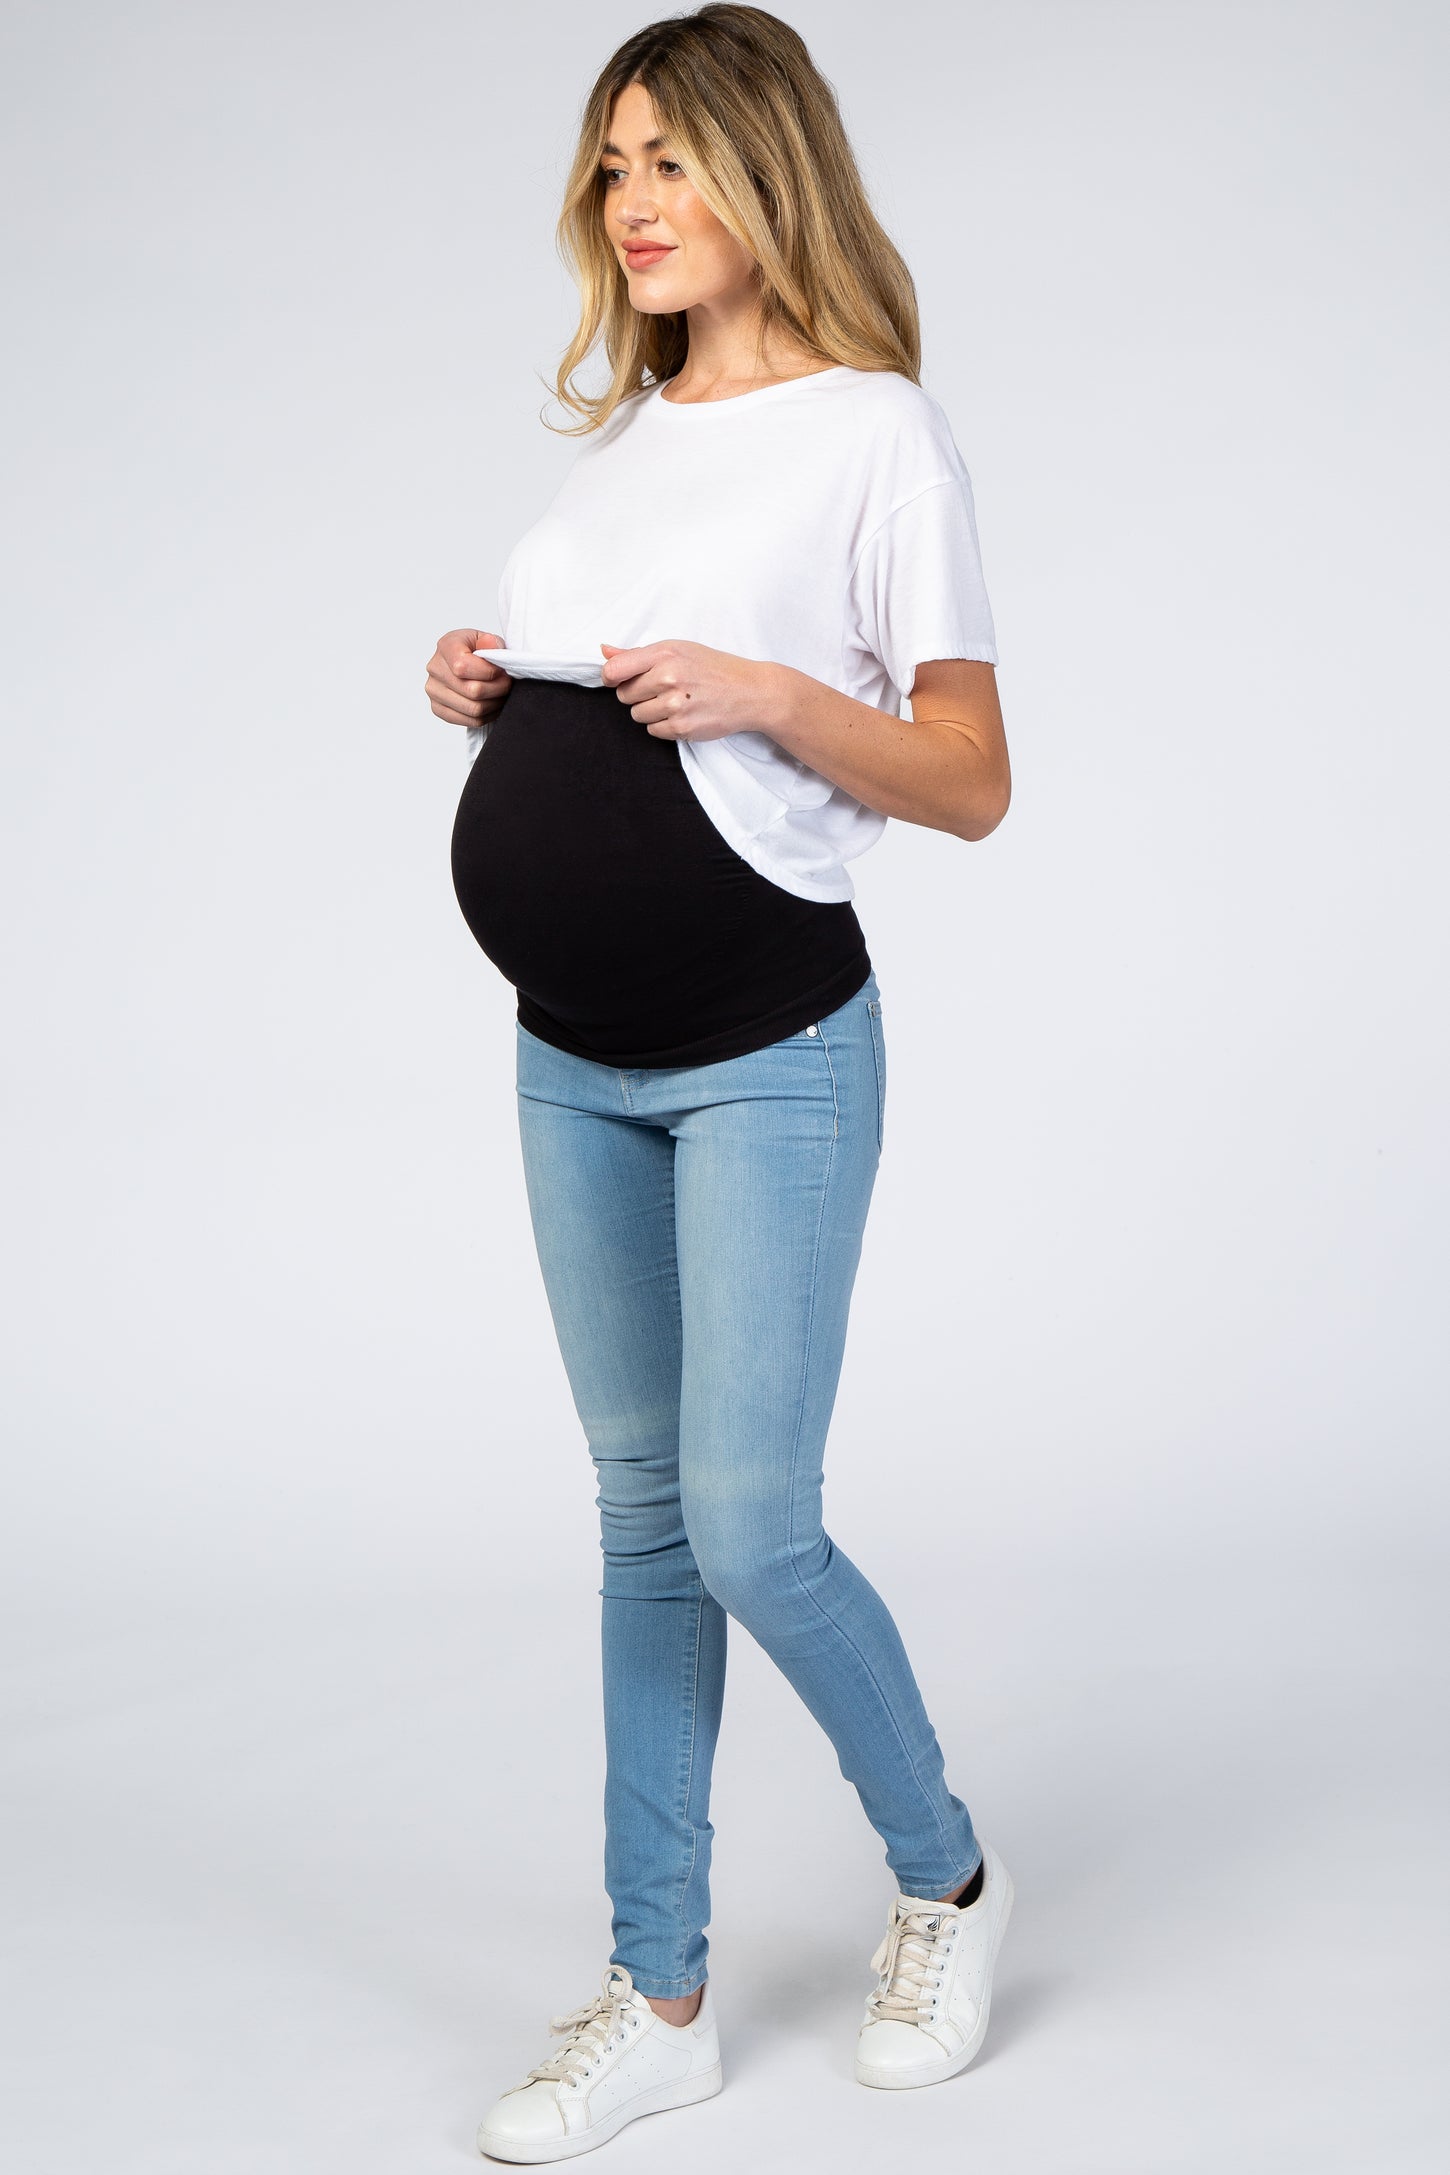 Black Belly Bandit Belly Boost Pregnancy Support Wrap– PinkBlush